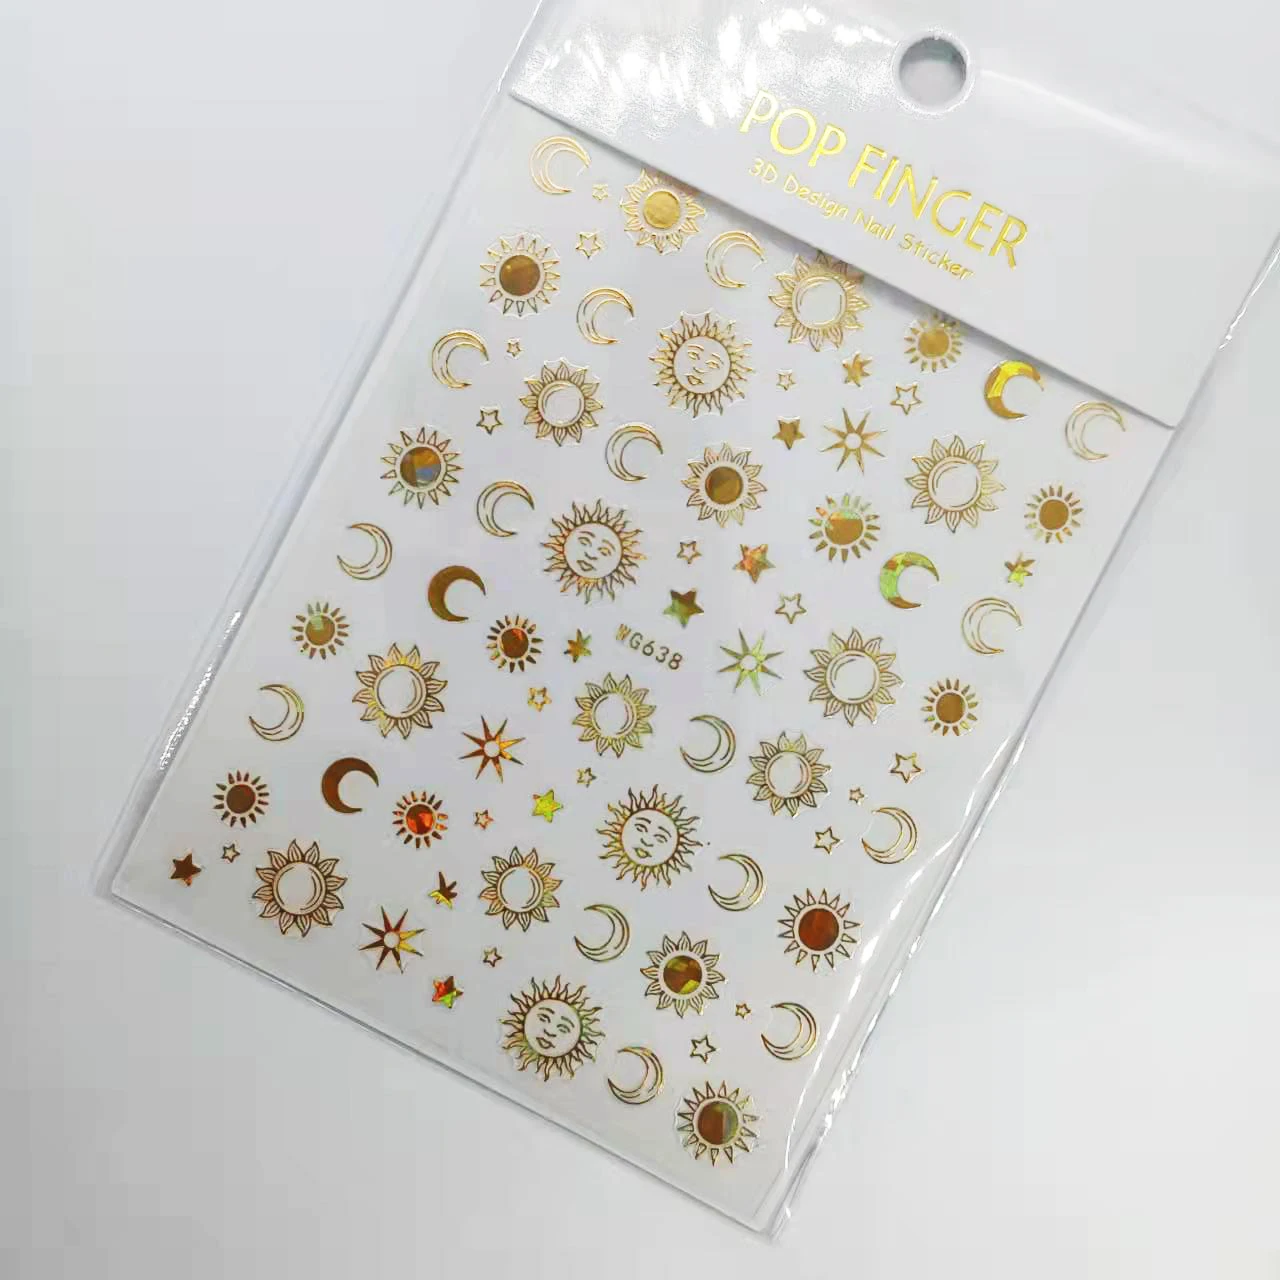 Shiny Gold Star Moon Sun Nail Stickers for Manicure Accessories Heart Feather Animals Printing Self Adhesive Nail Wrap